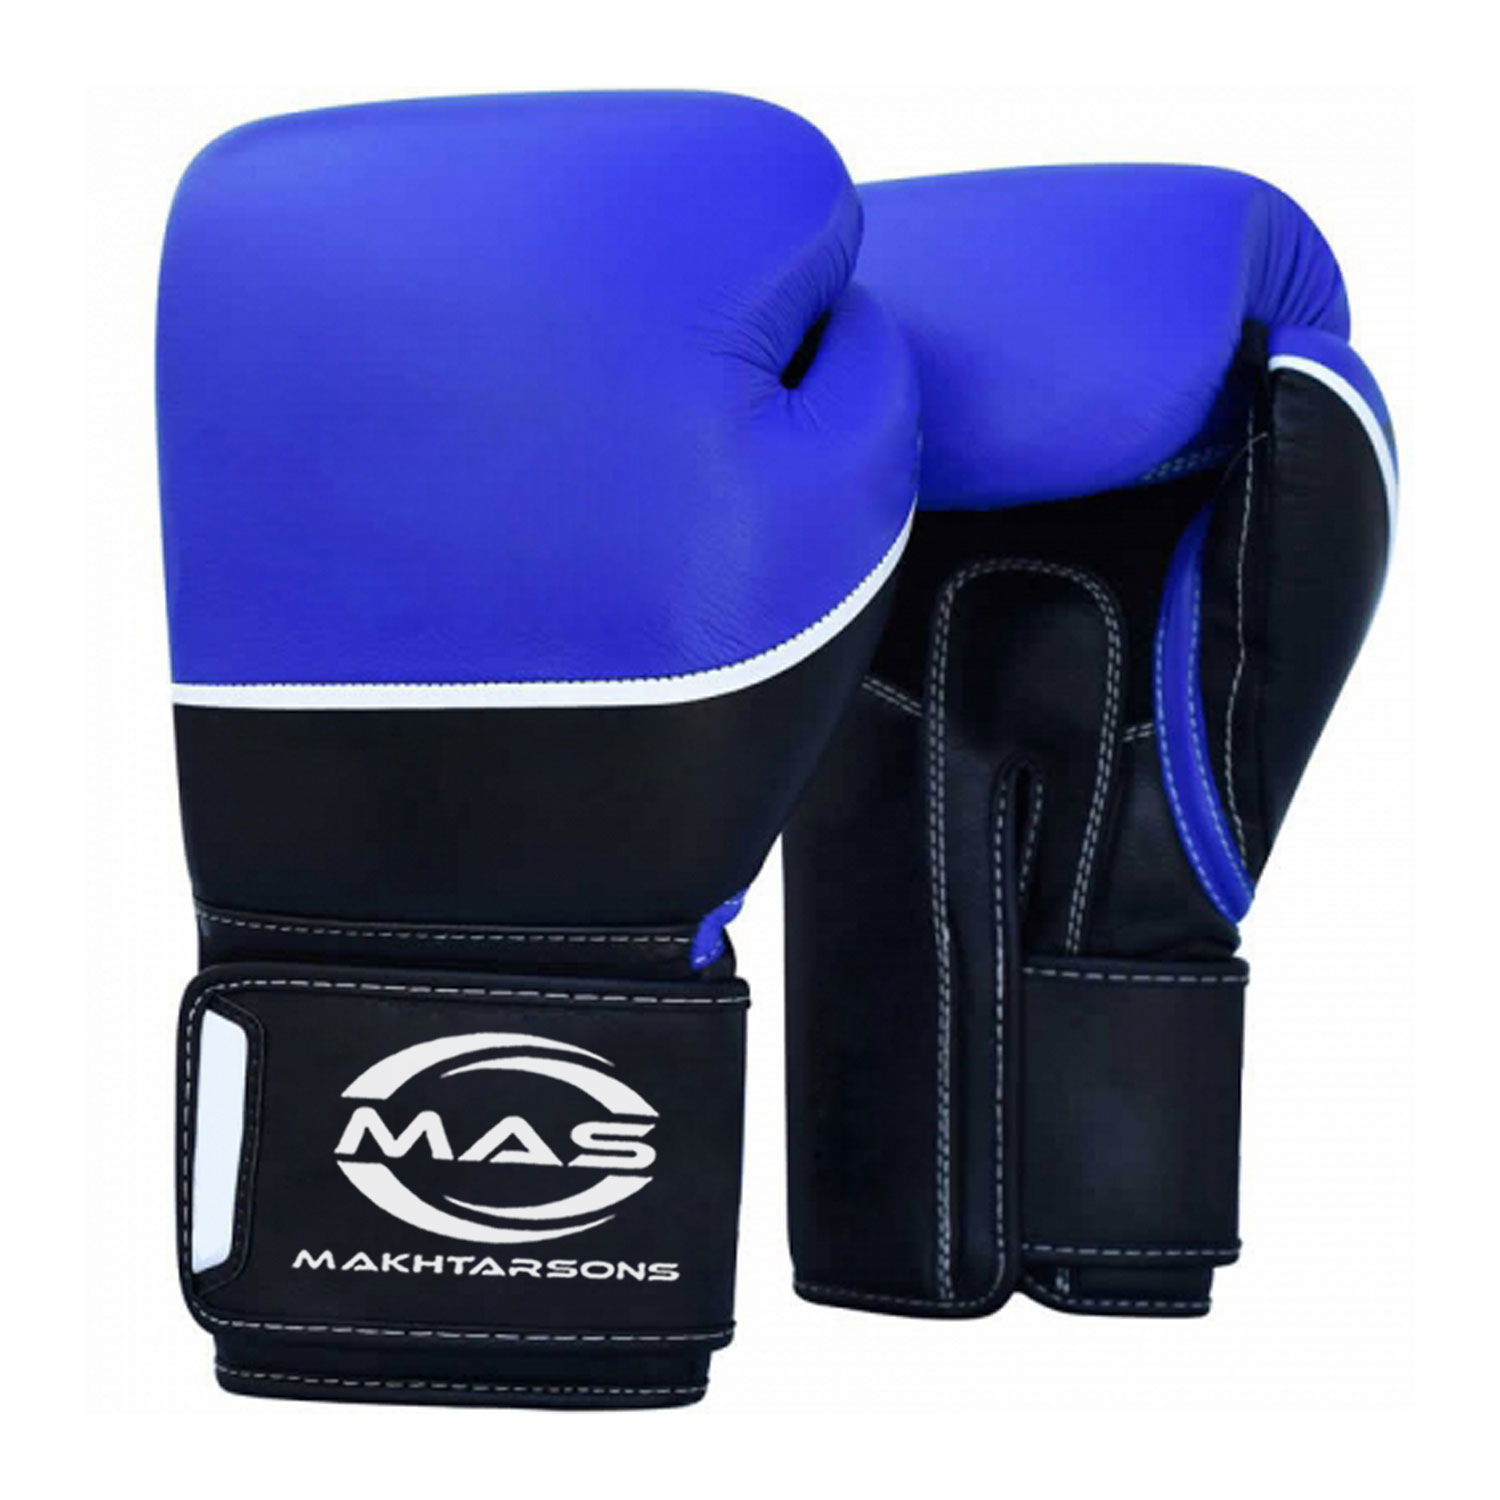 PROFESSIONAL BOXING GLOVES | MAS 203